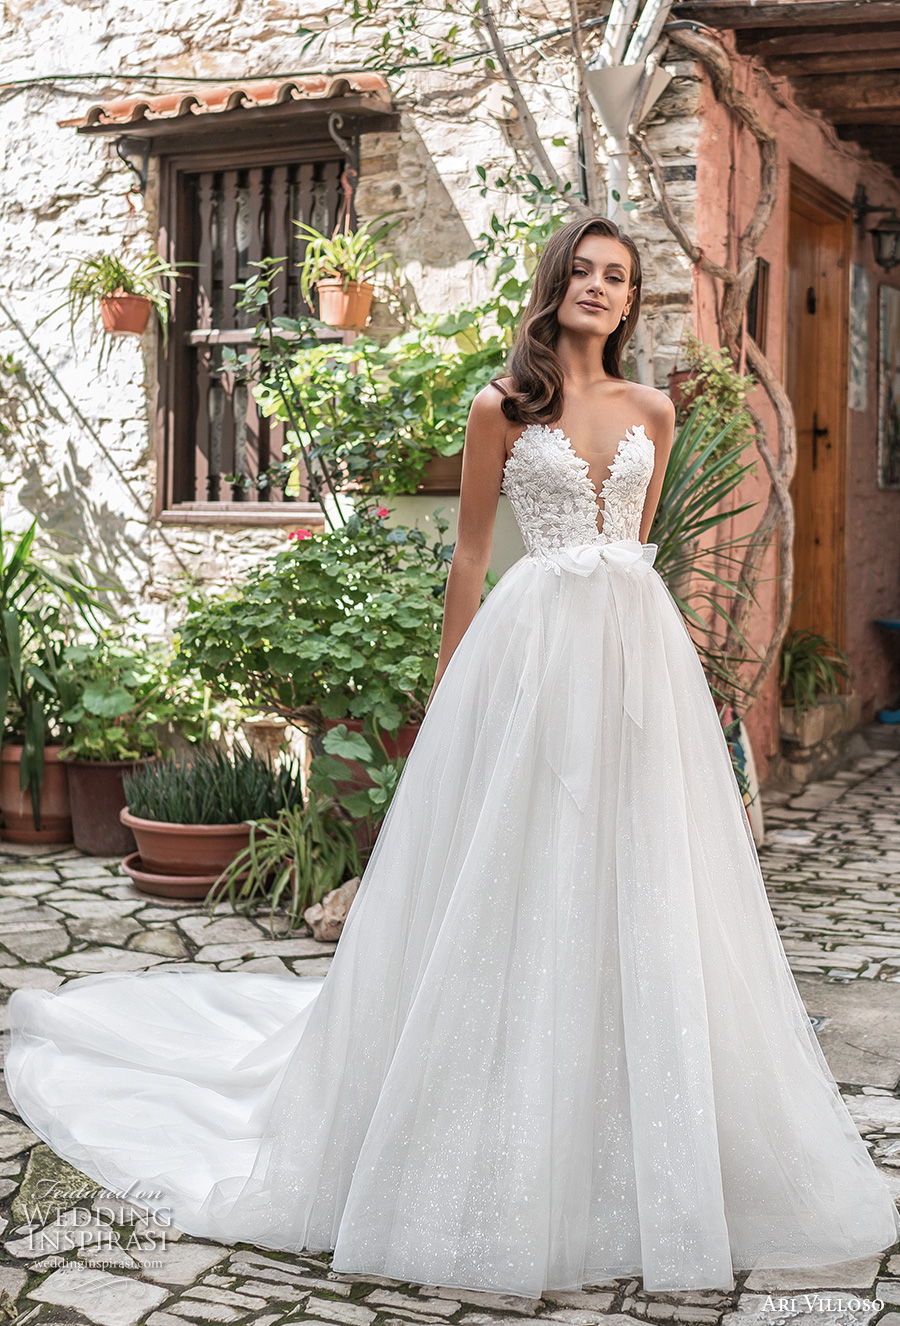 2021 Wedding Dress Trends Part 2 — Silhouettes and Other Details ...